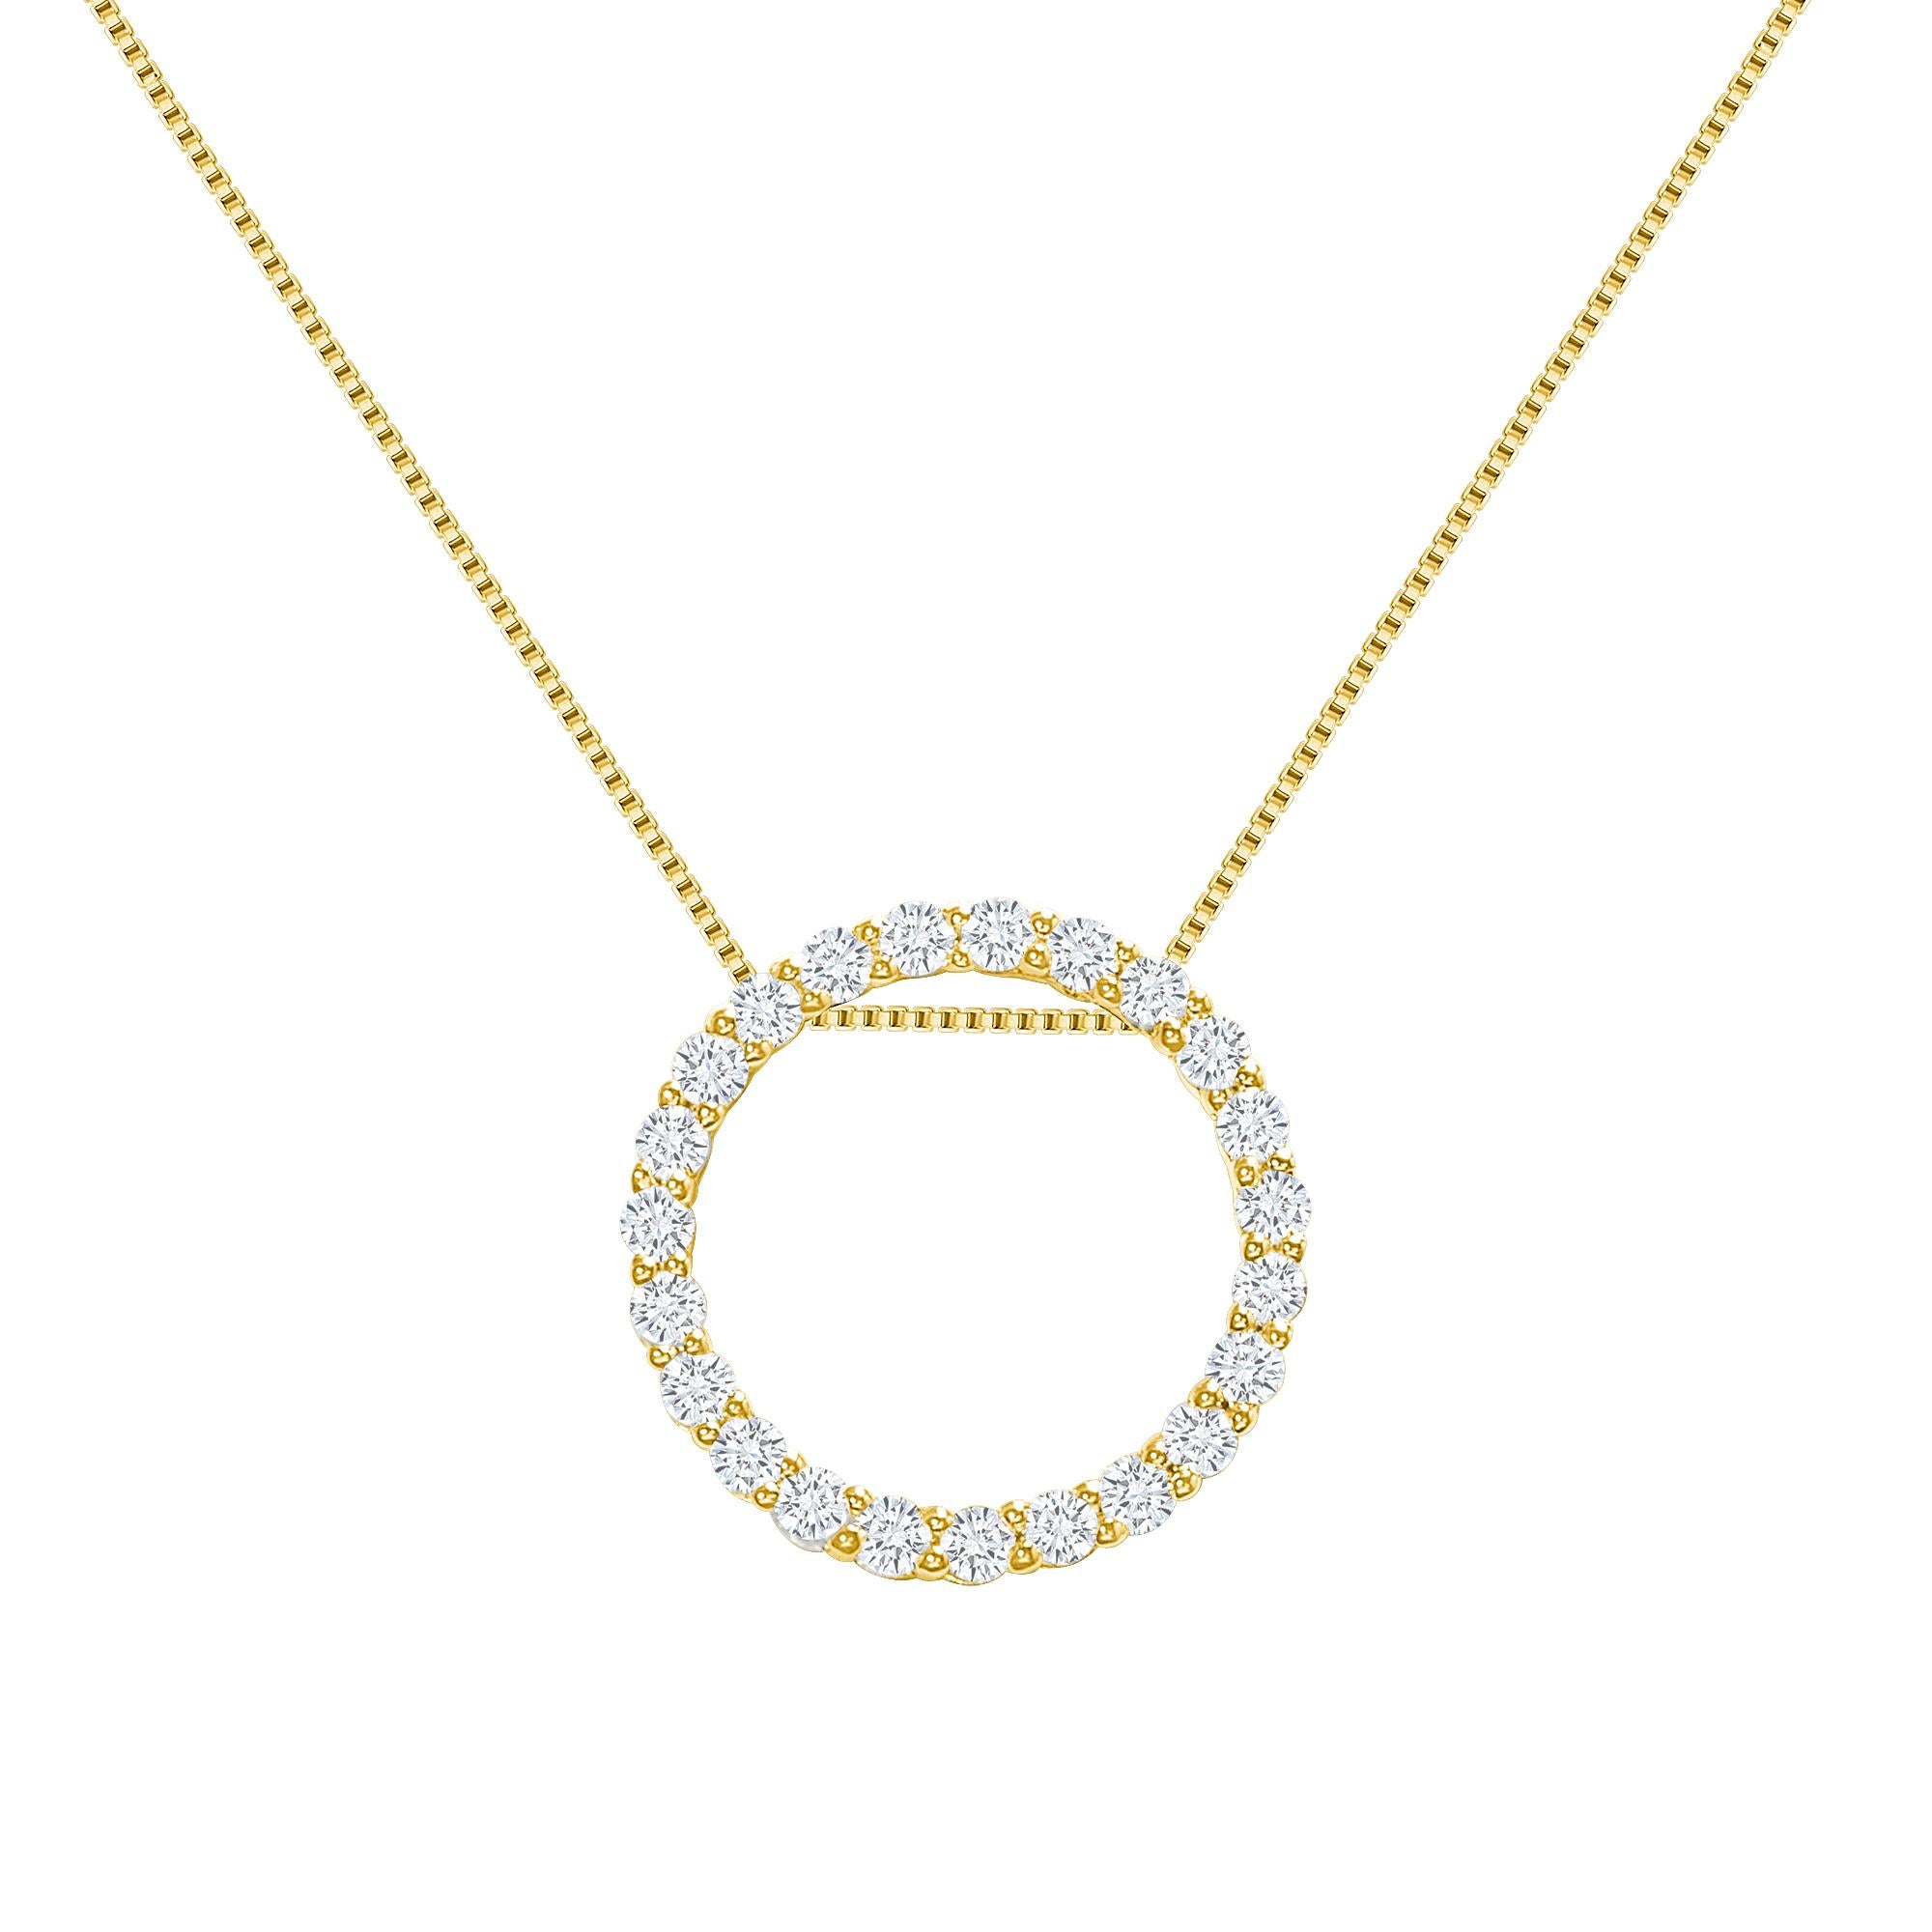 This diamond circle pendant provides a glowing chic look.
Metal: 14k Gold
Diamond Total Carats: 3 carat
Diamond Cut: Round Natural Diamonds (Not Lab Grown)
Diamond Clarity: VS
Diamond Color: F-G
Color: Yellow Gold
Necklace Length: 14 inches